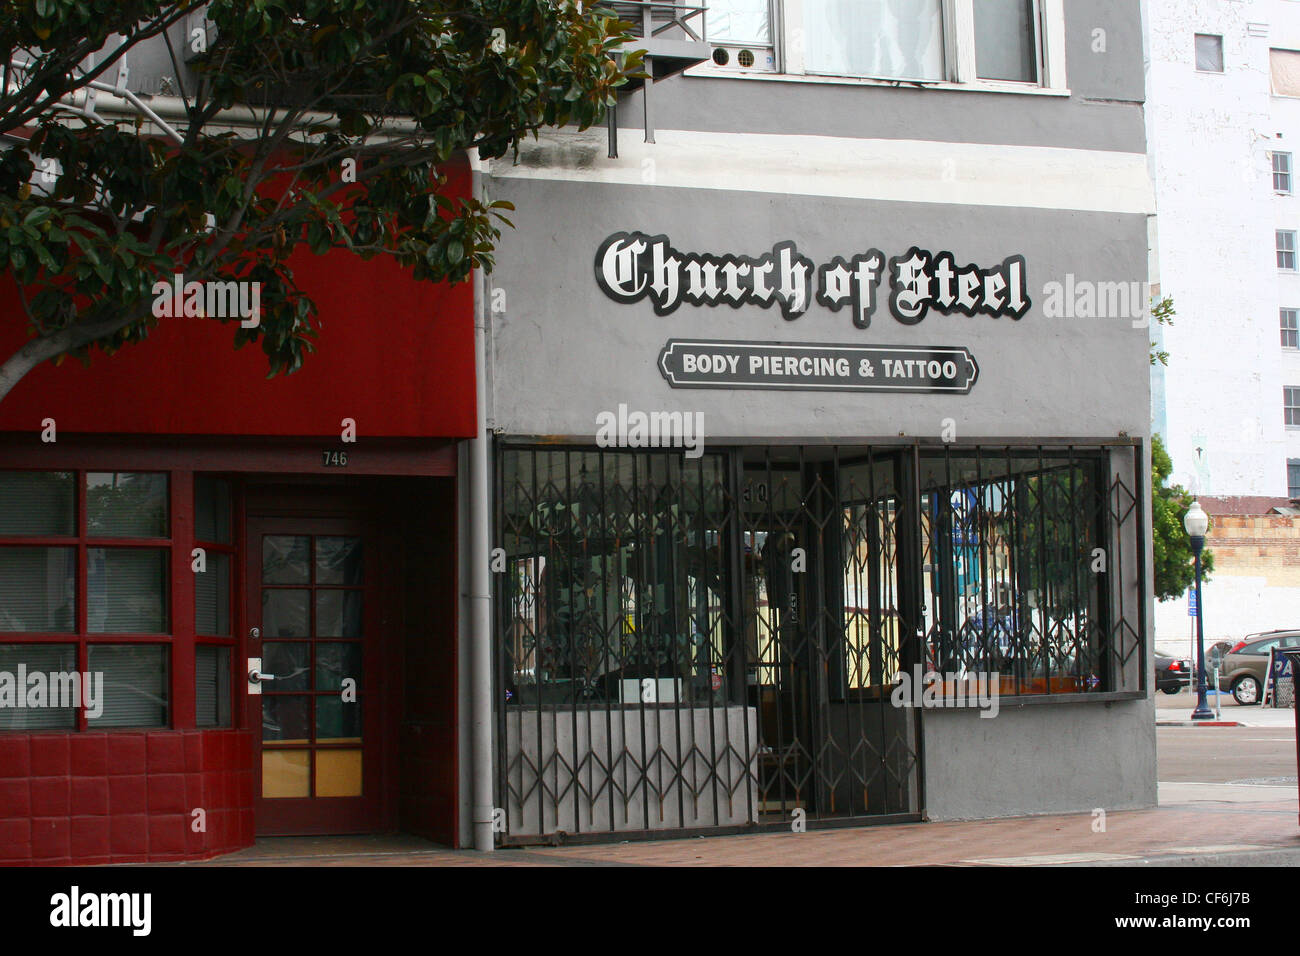 Images of San Diego, California.  Downtown Gaslamp Church of Steel Stock Photo